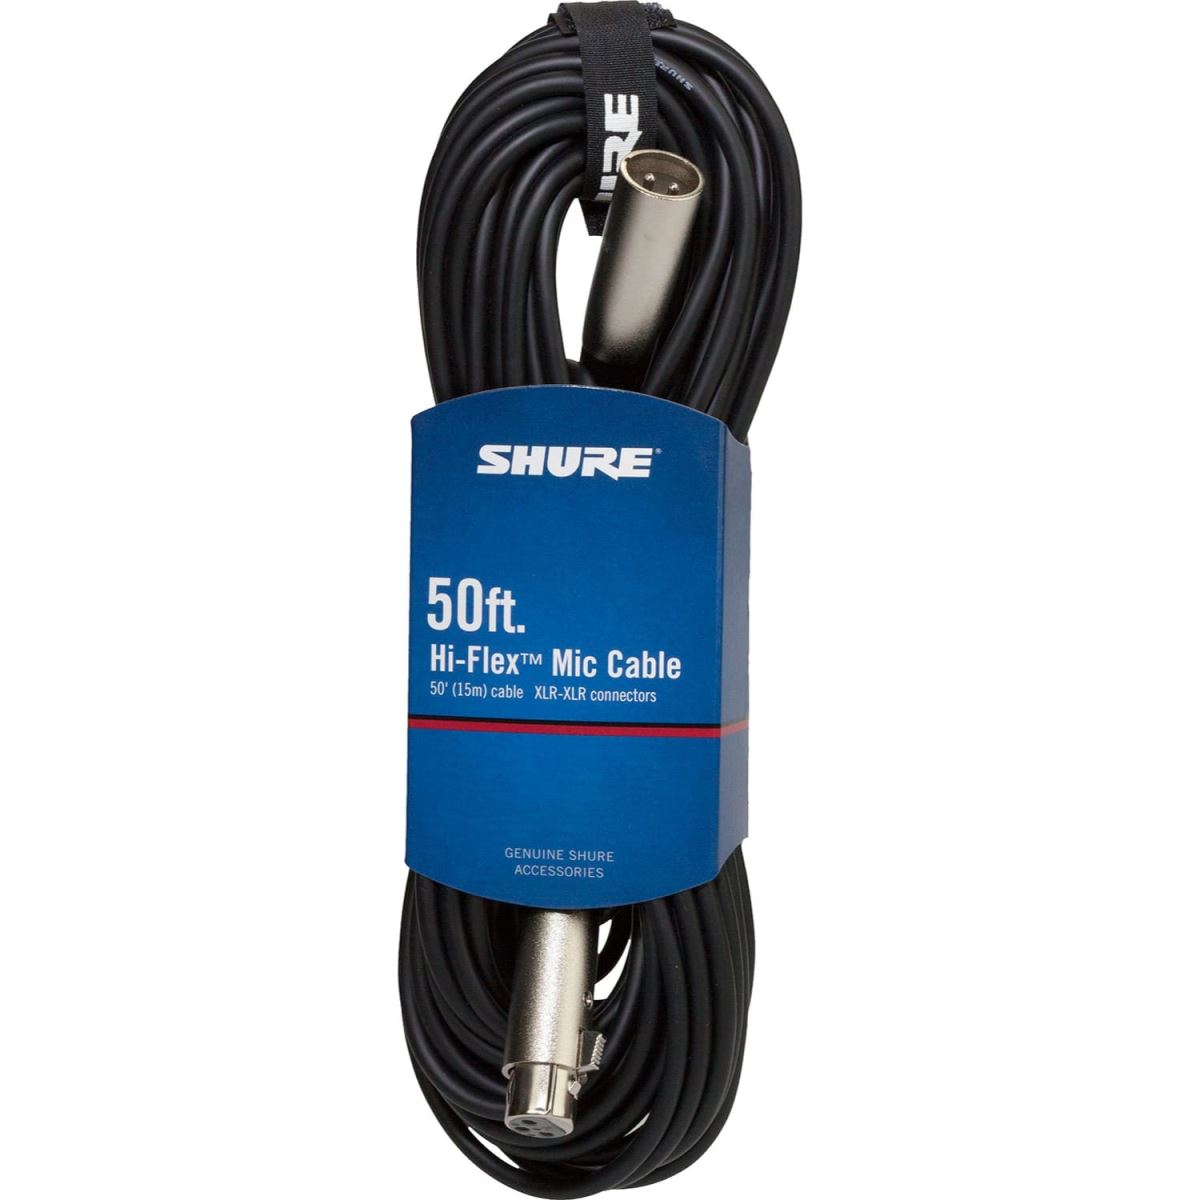 The Shure C50J Hi-Flex microphone cable is designed for low-impedance operation at long runs. The cable measures 50 feet (15 m).